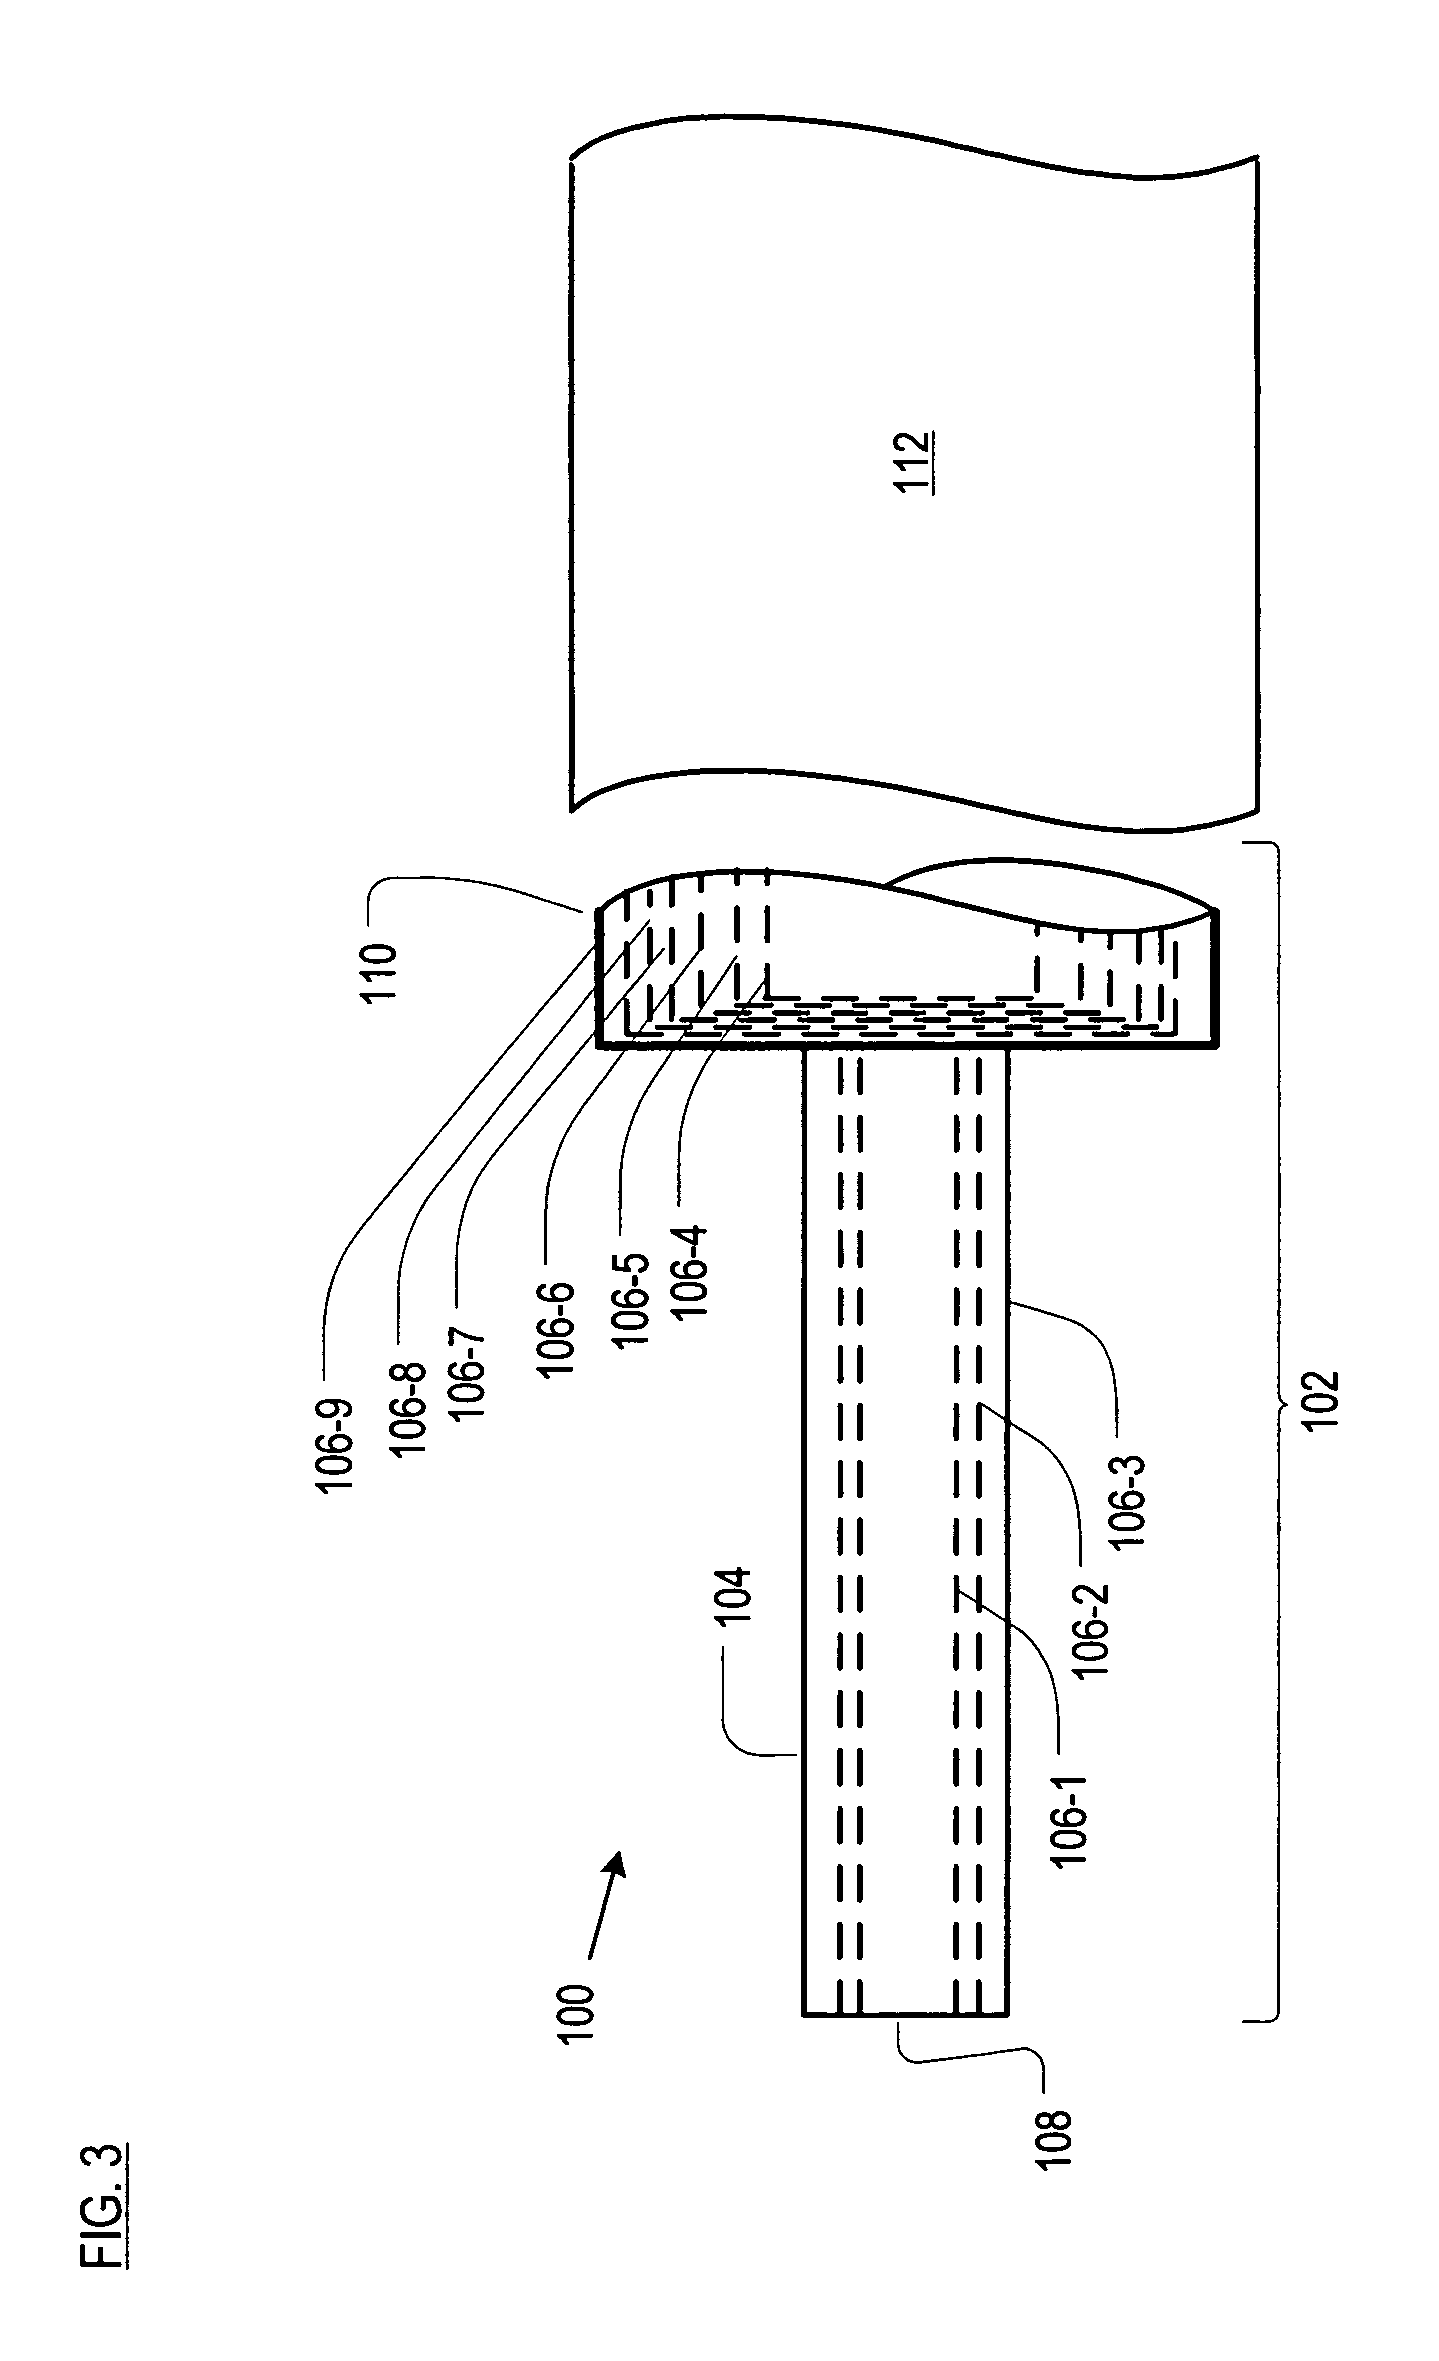 Cavity-running projectile having a telescoping nose